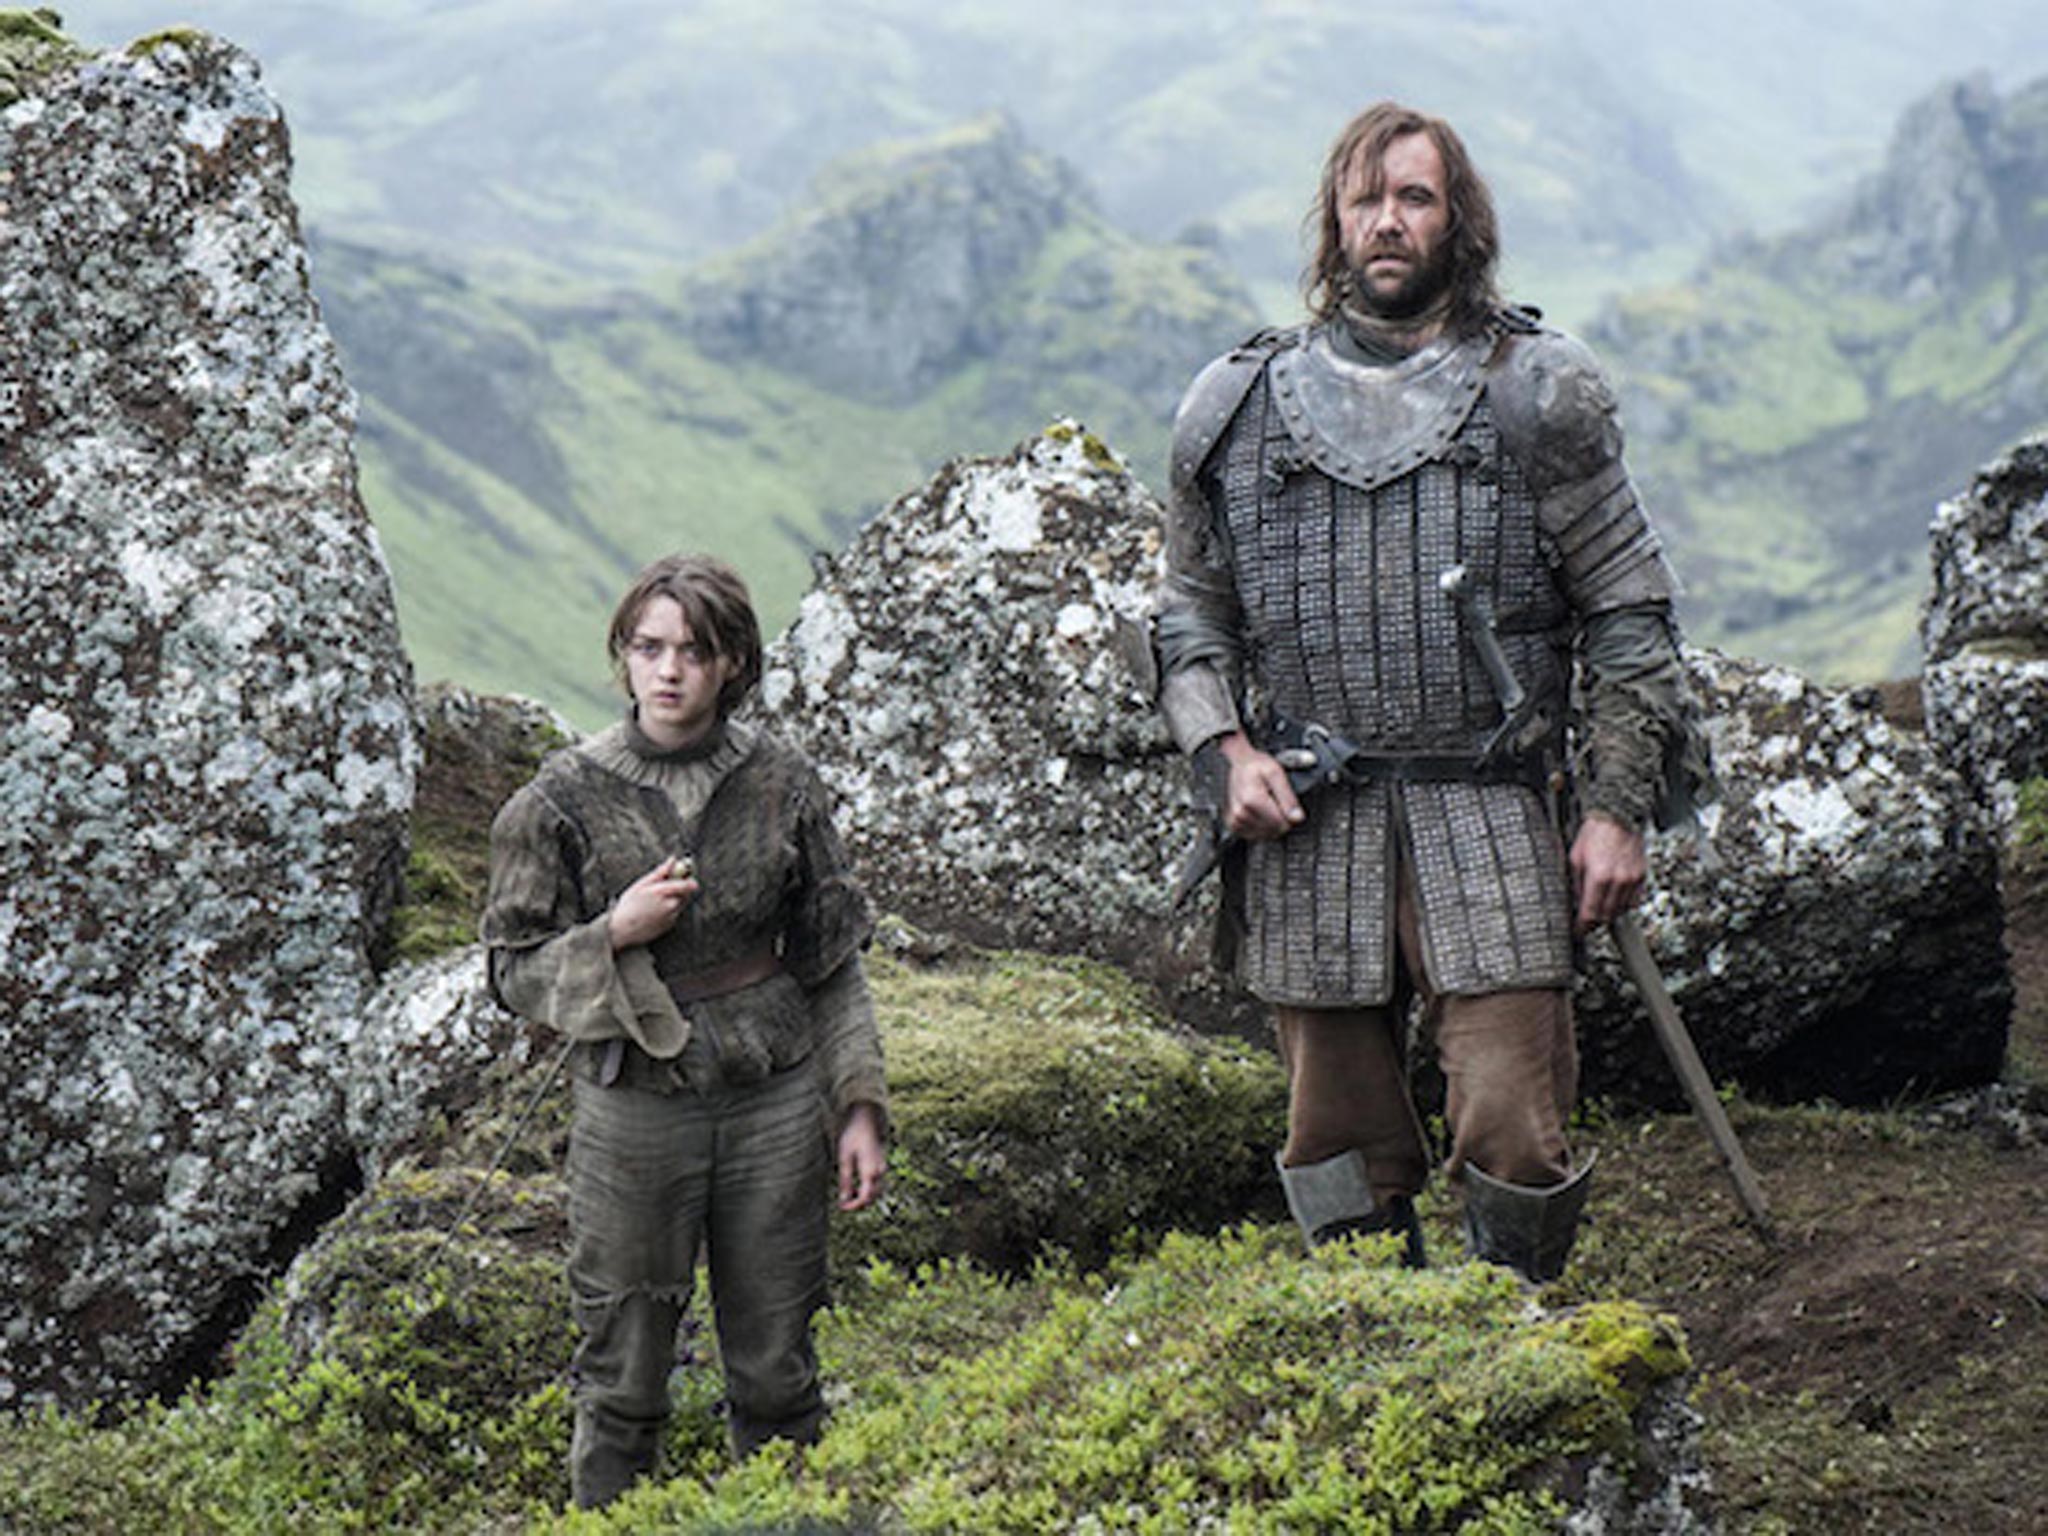 Arya and the Hound meet an unwelcome visitor